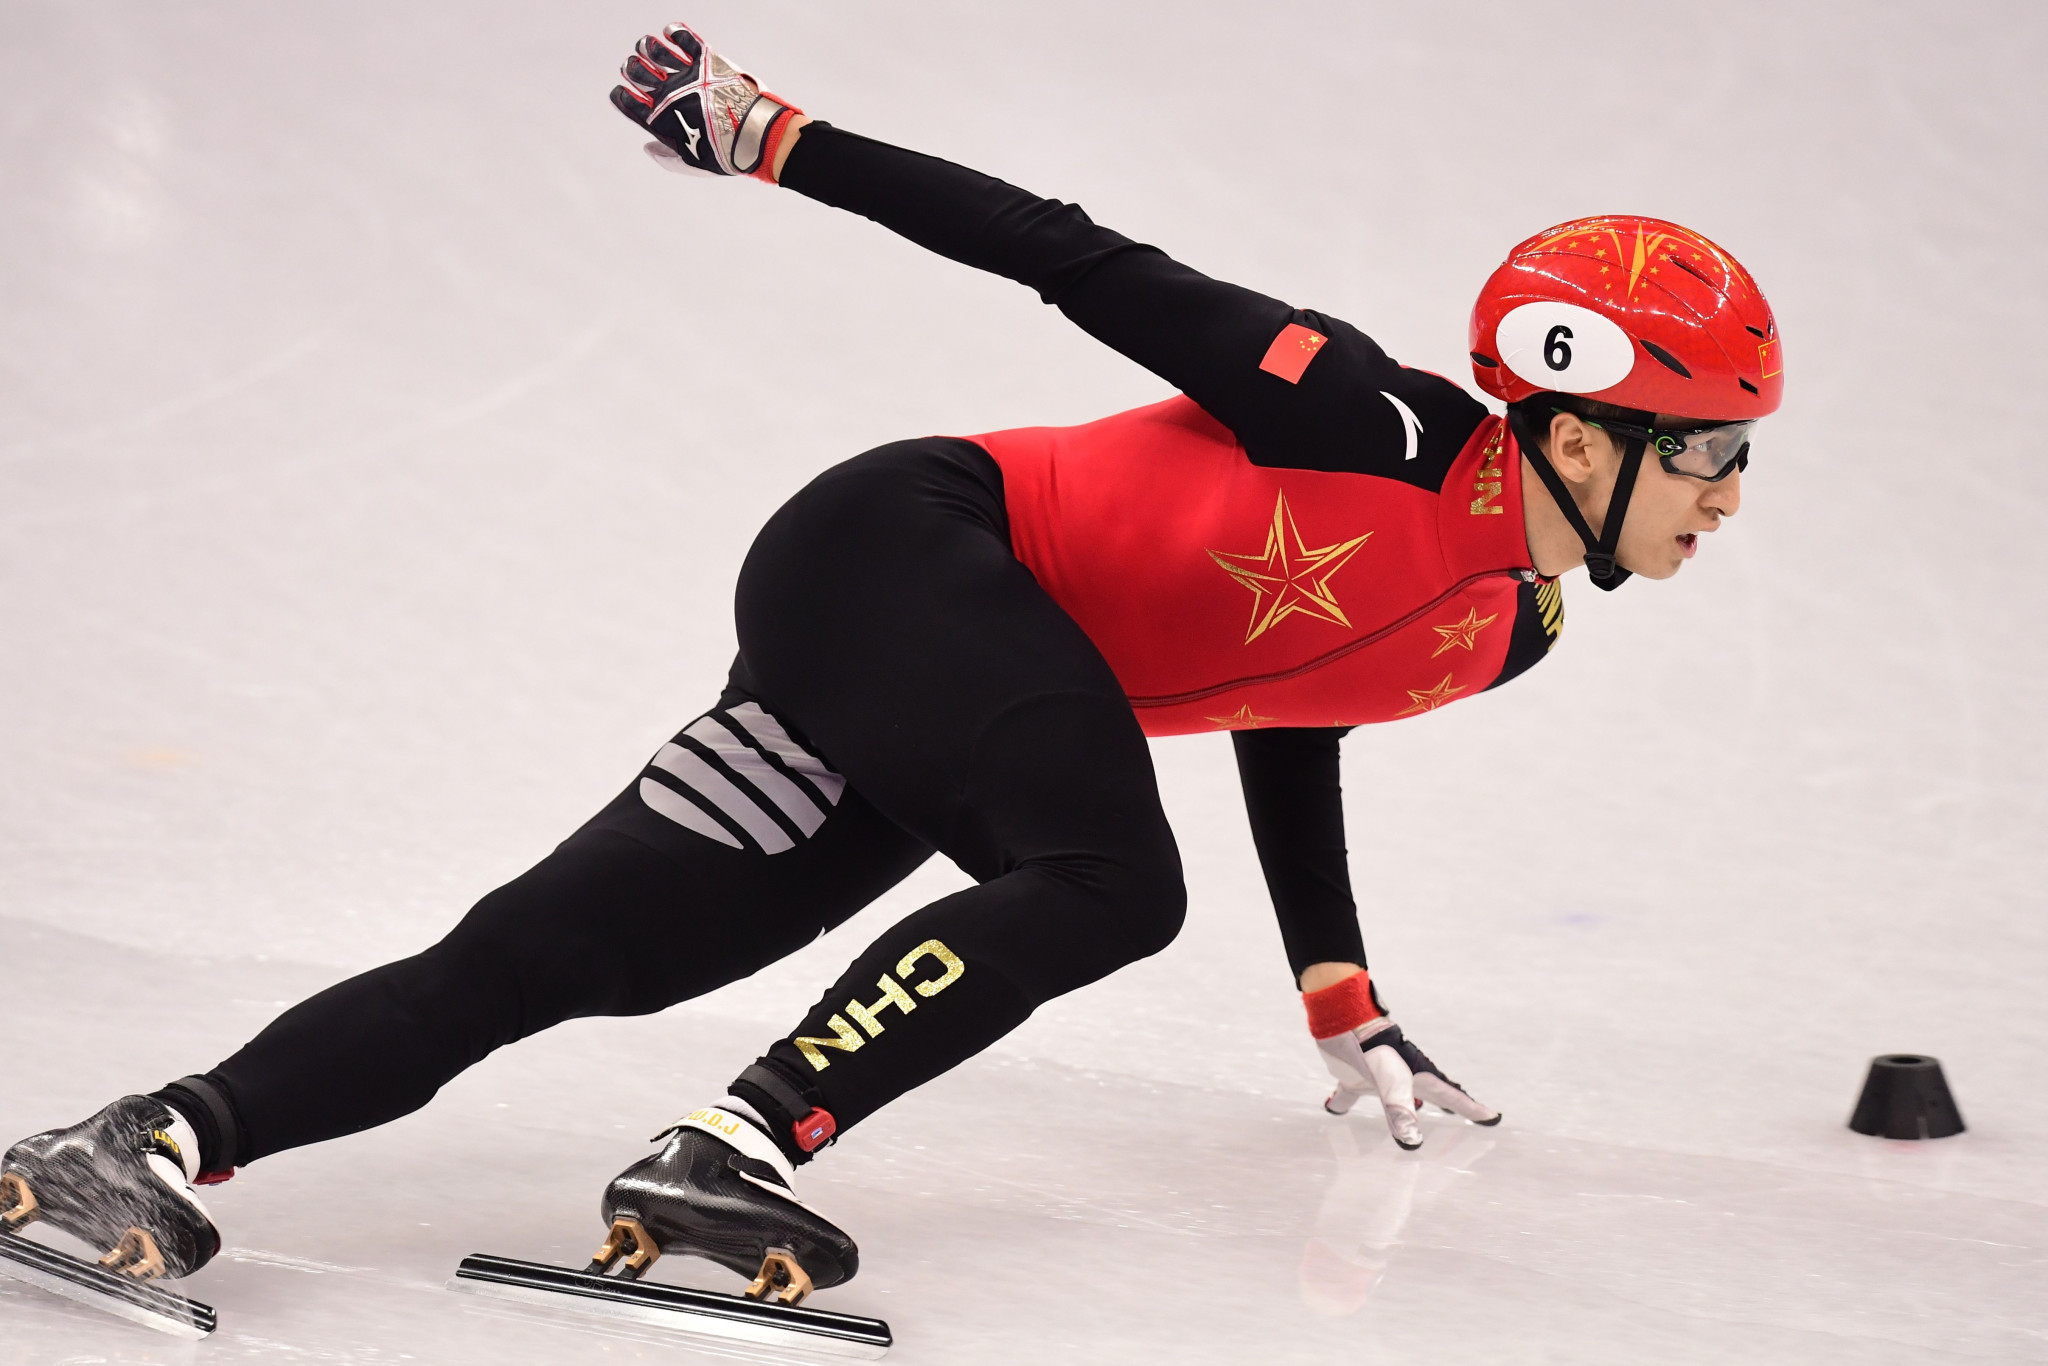 China's Olympic short track speed skating champion Olympic Wu Dajing is among a number of athletes to feature in the new ISU campaign video ©Getty Images